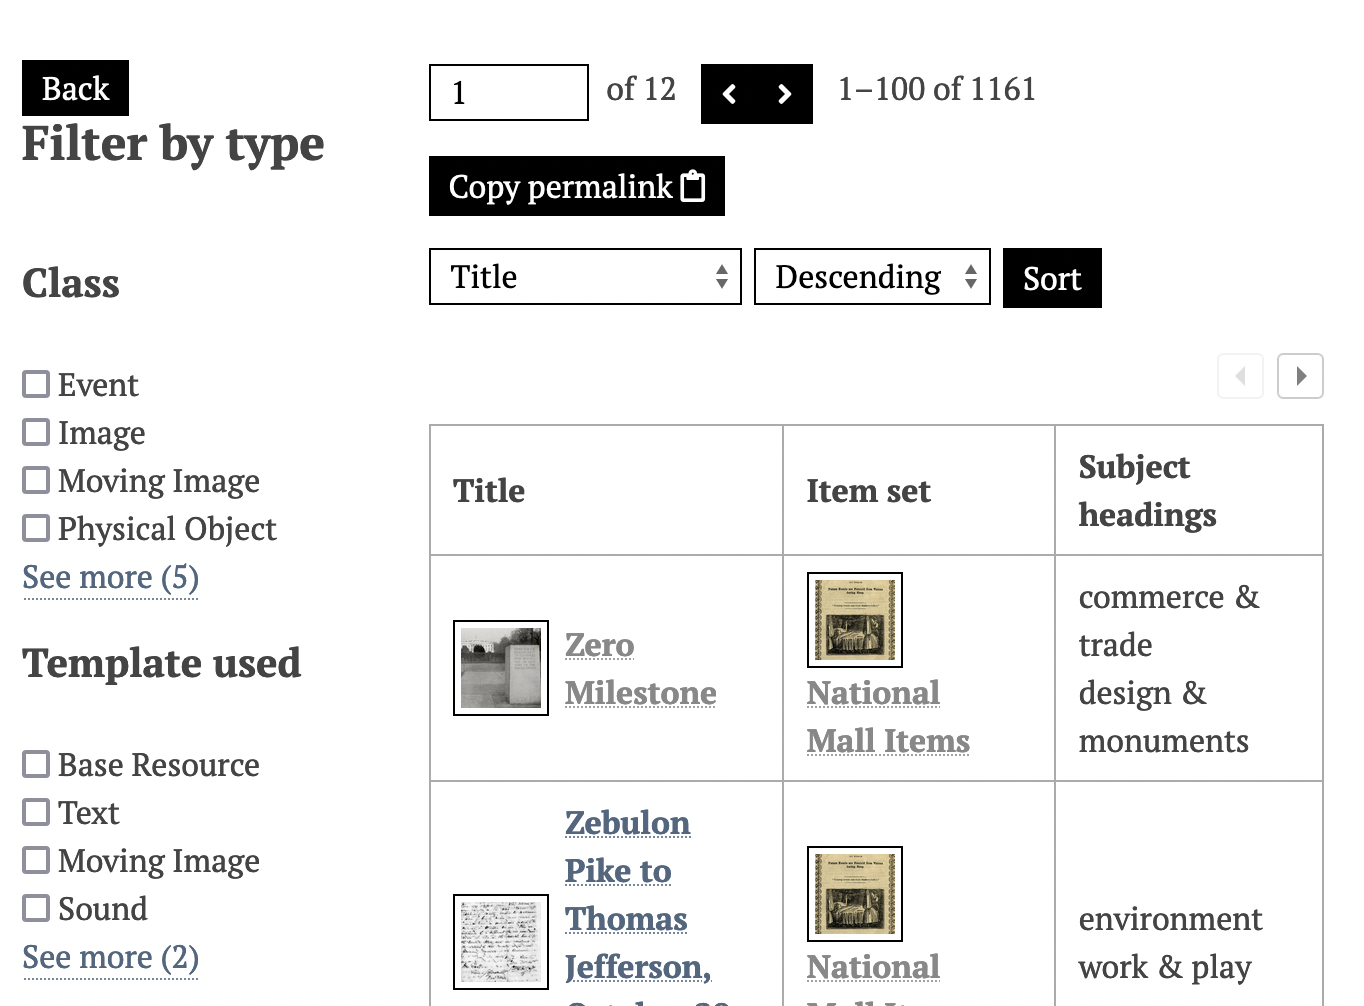 Faceted Browse page with the results table displaying left and right arrows to view columns that are not visible at the current page width.